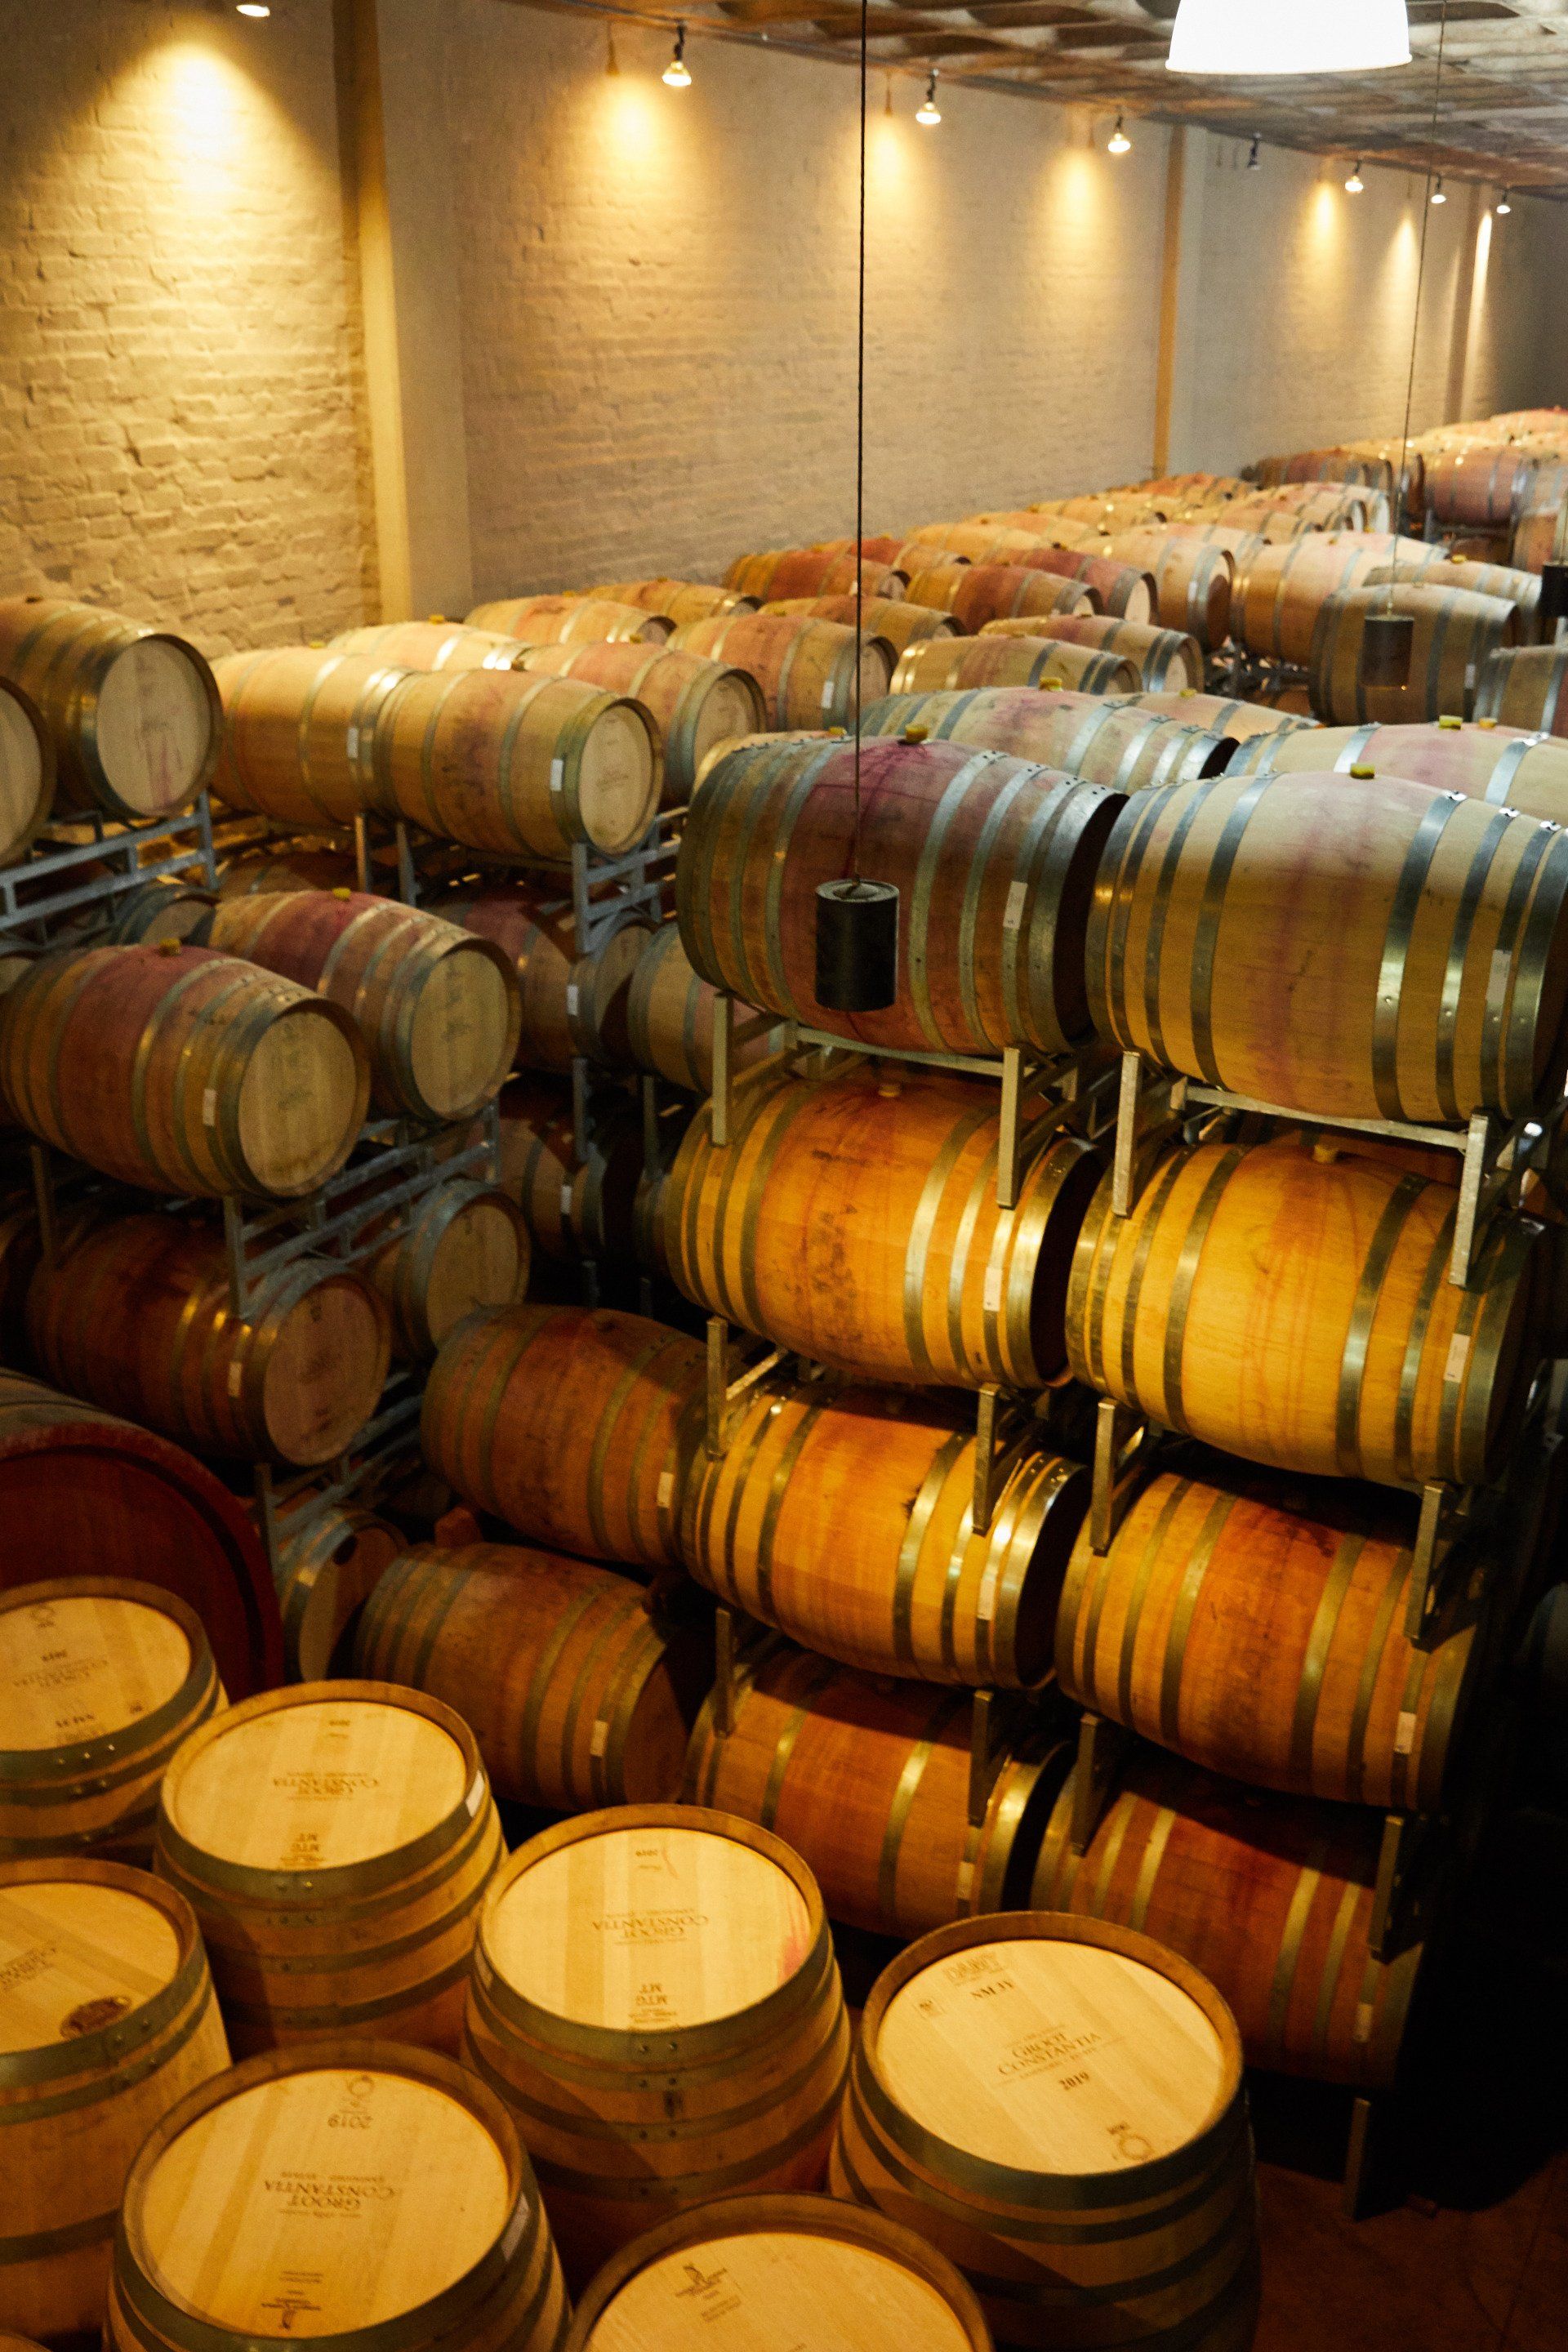 A bunch of wine barrels are stacked on top of each other